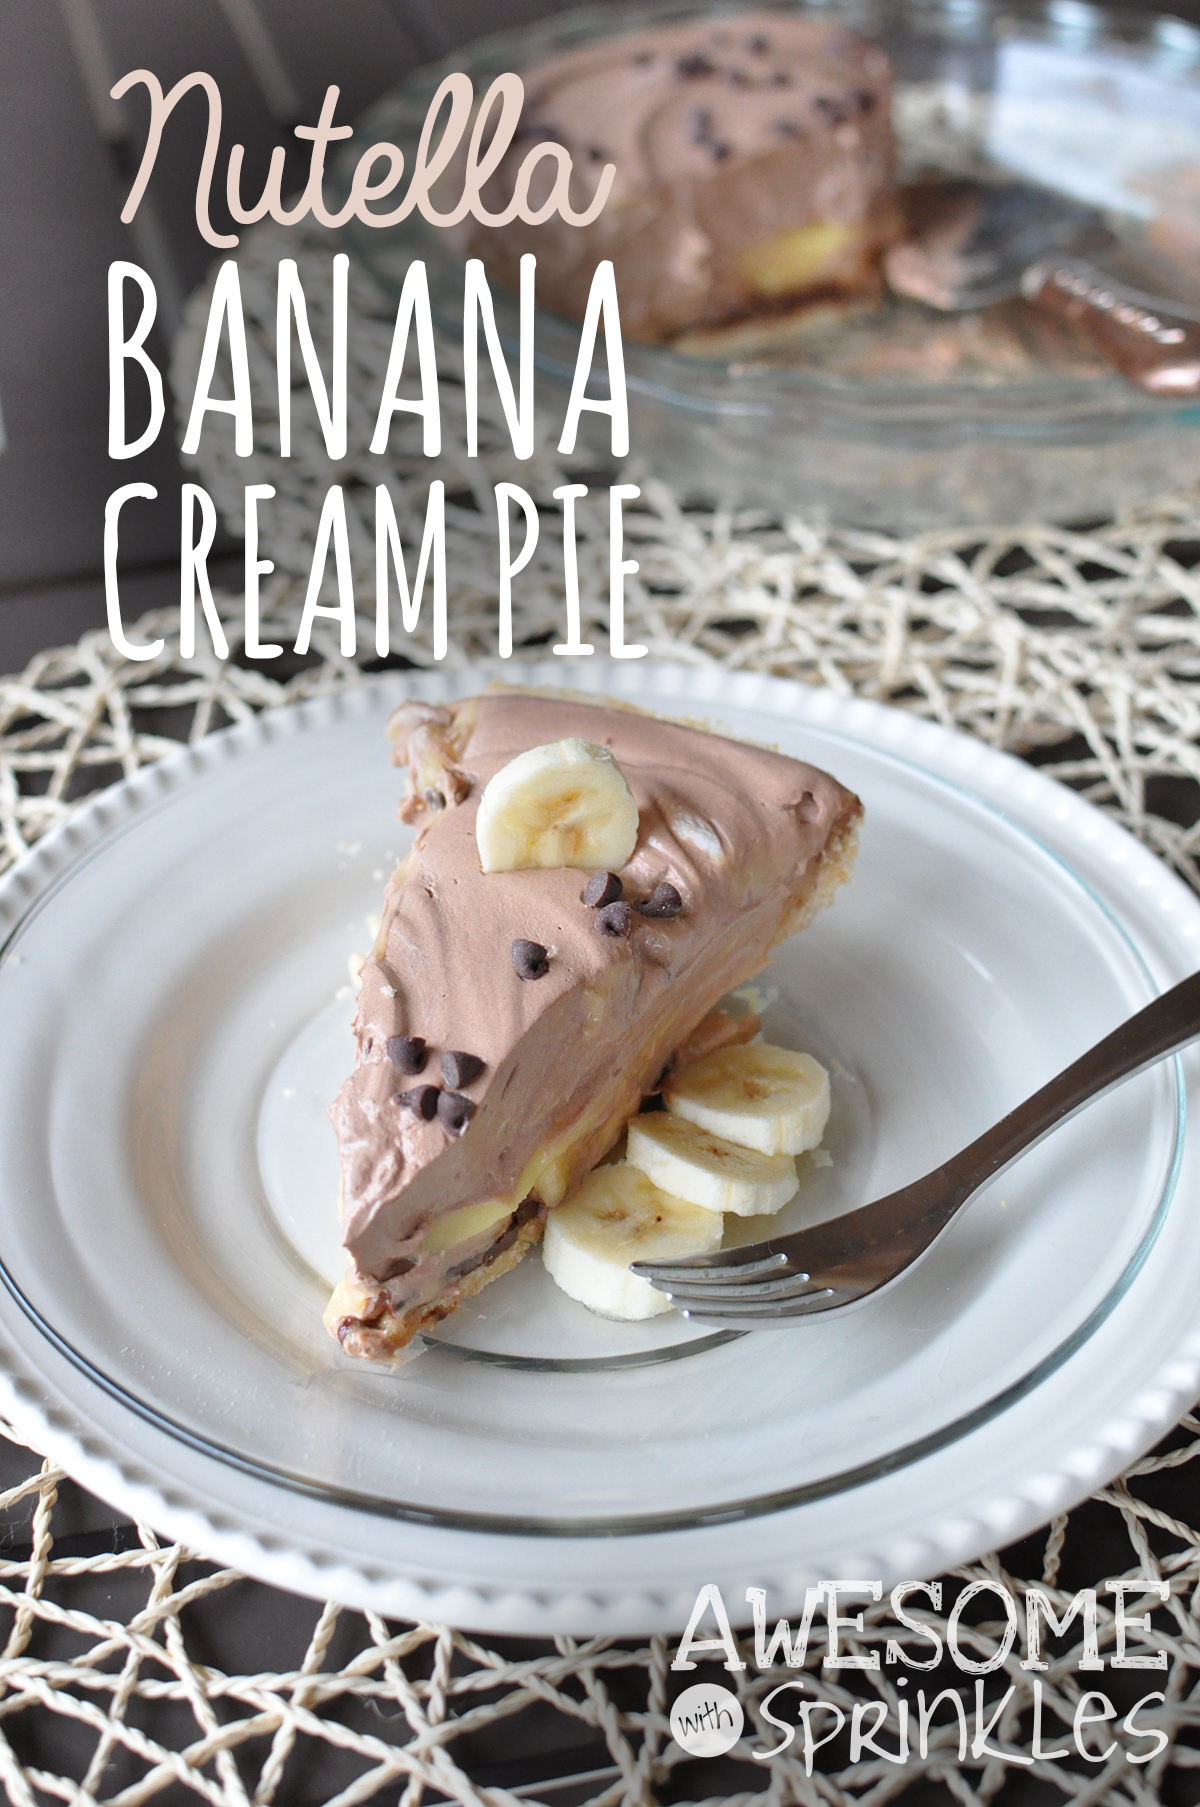 Nutella Banana Cream Pie | Awesome with Sprinkles